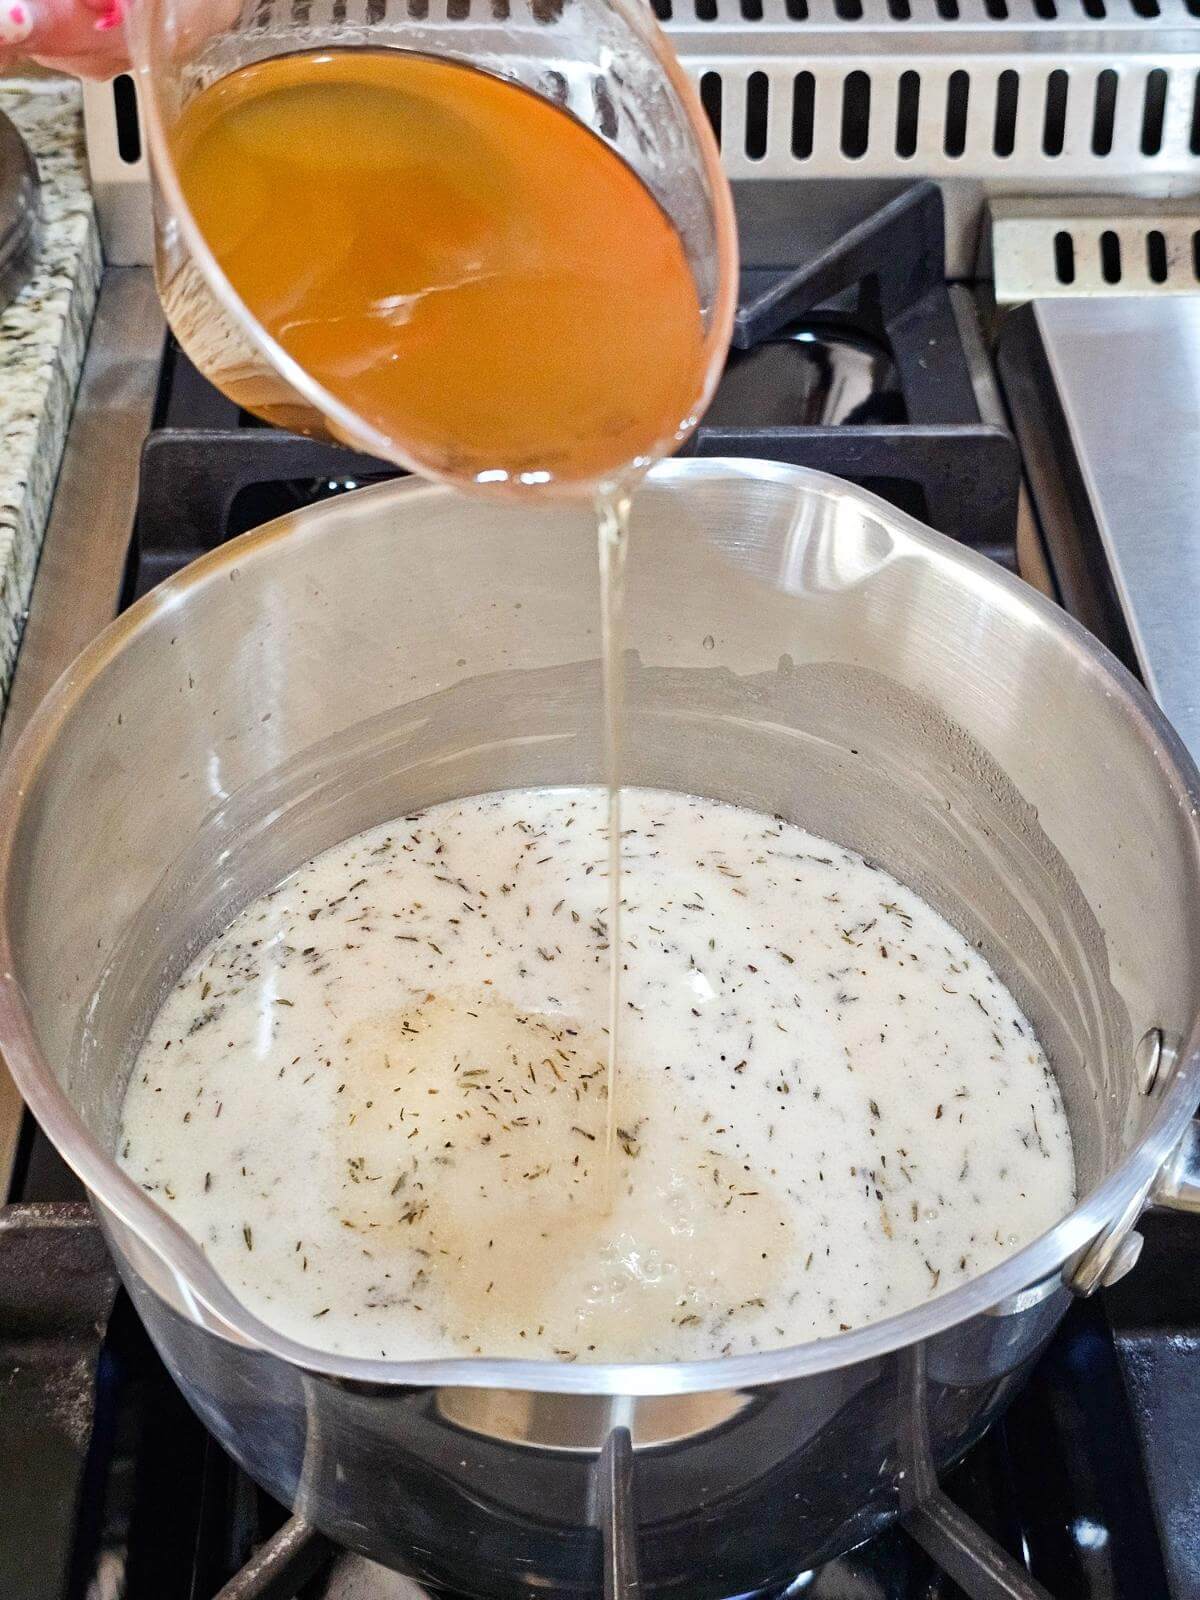 Broth being poured into a pot of seasoned milk mixture.